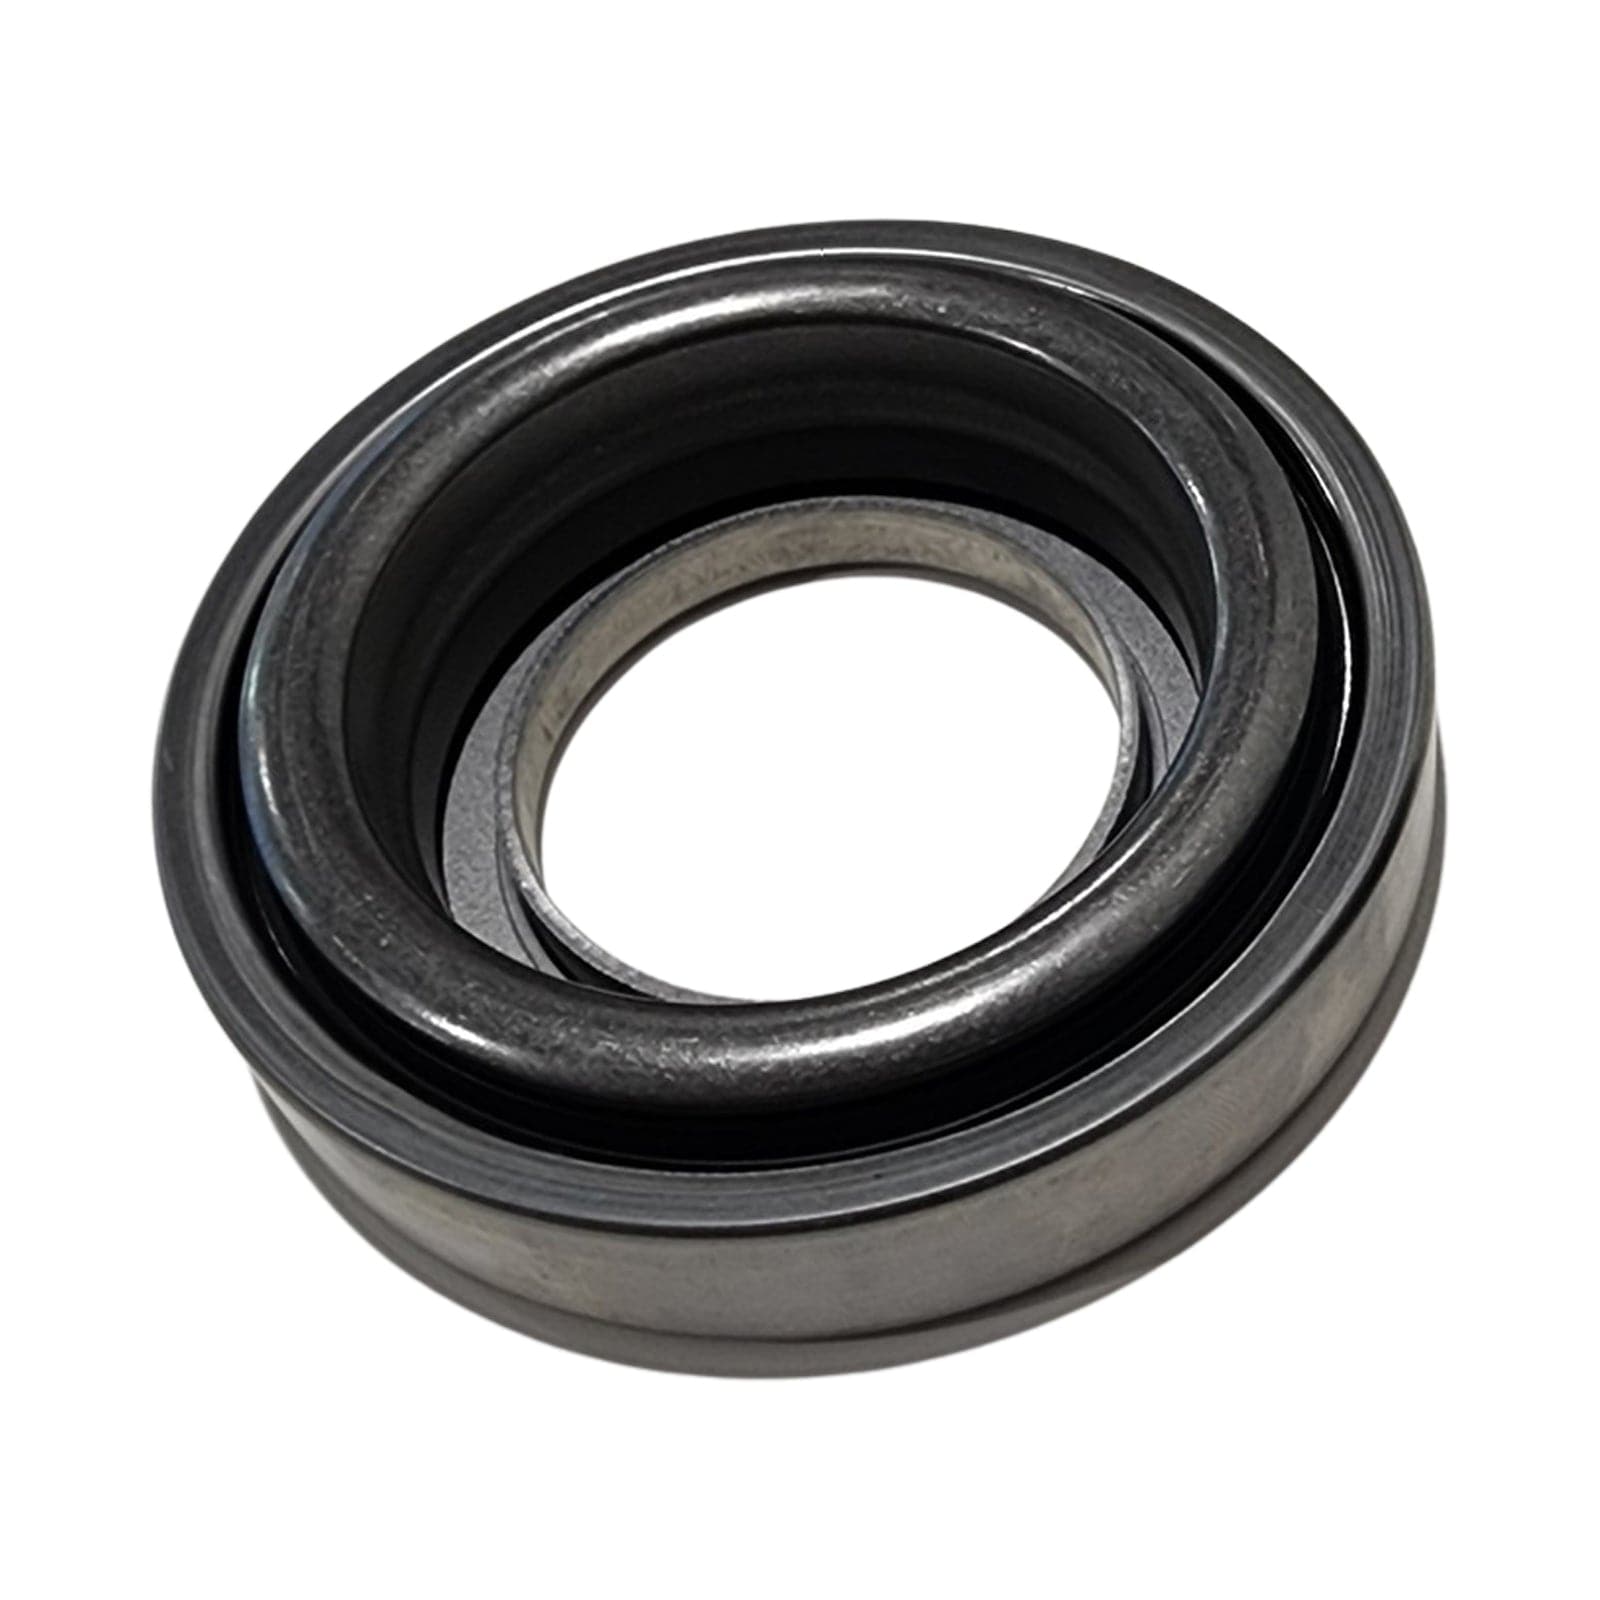 CLUTCH THROWOUT BEARING for VL / RB (NOS)